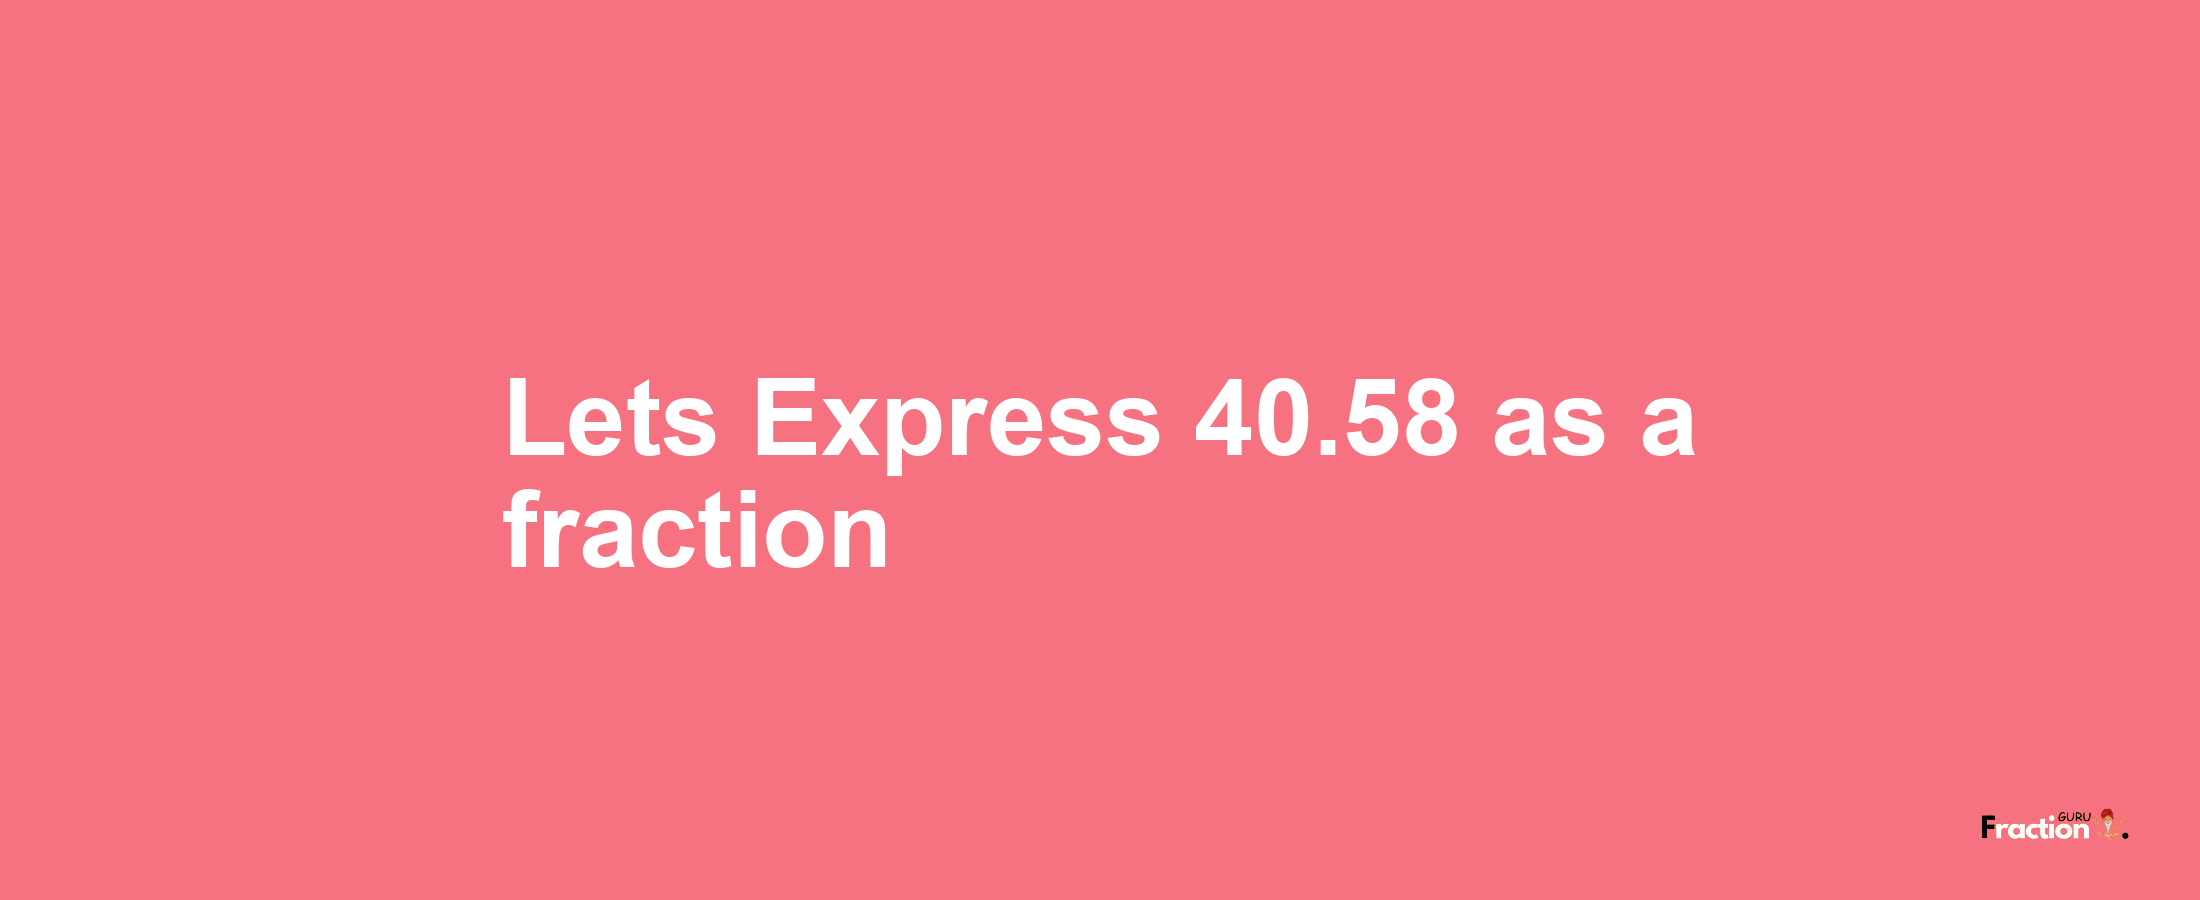 Lets Express 40.58 as afraction